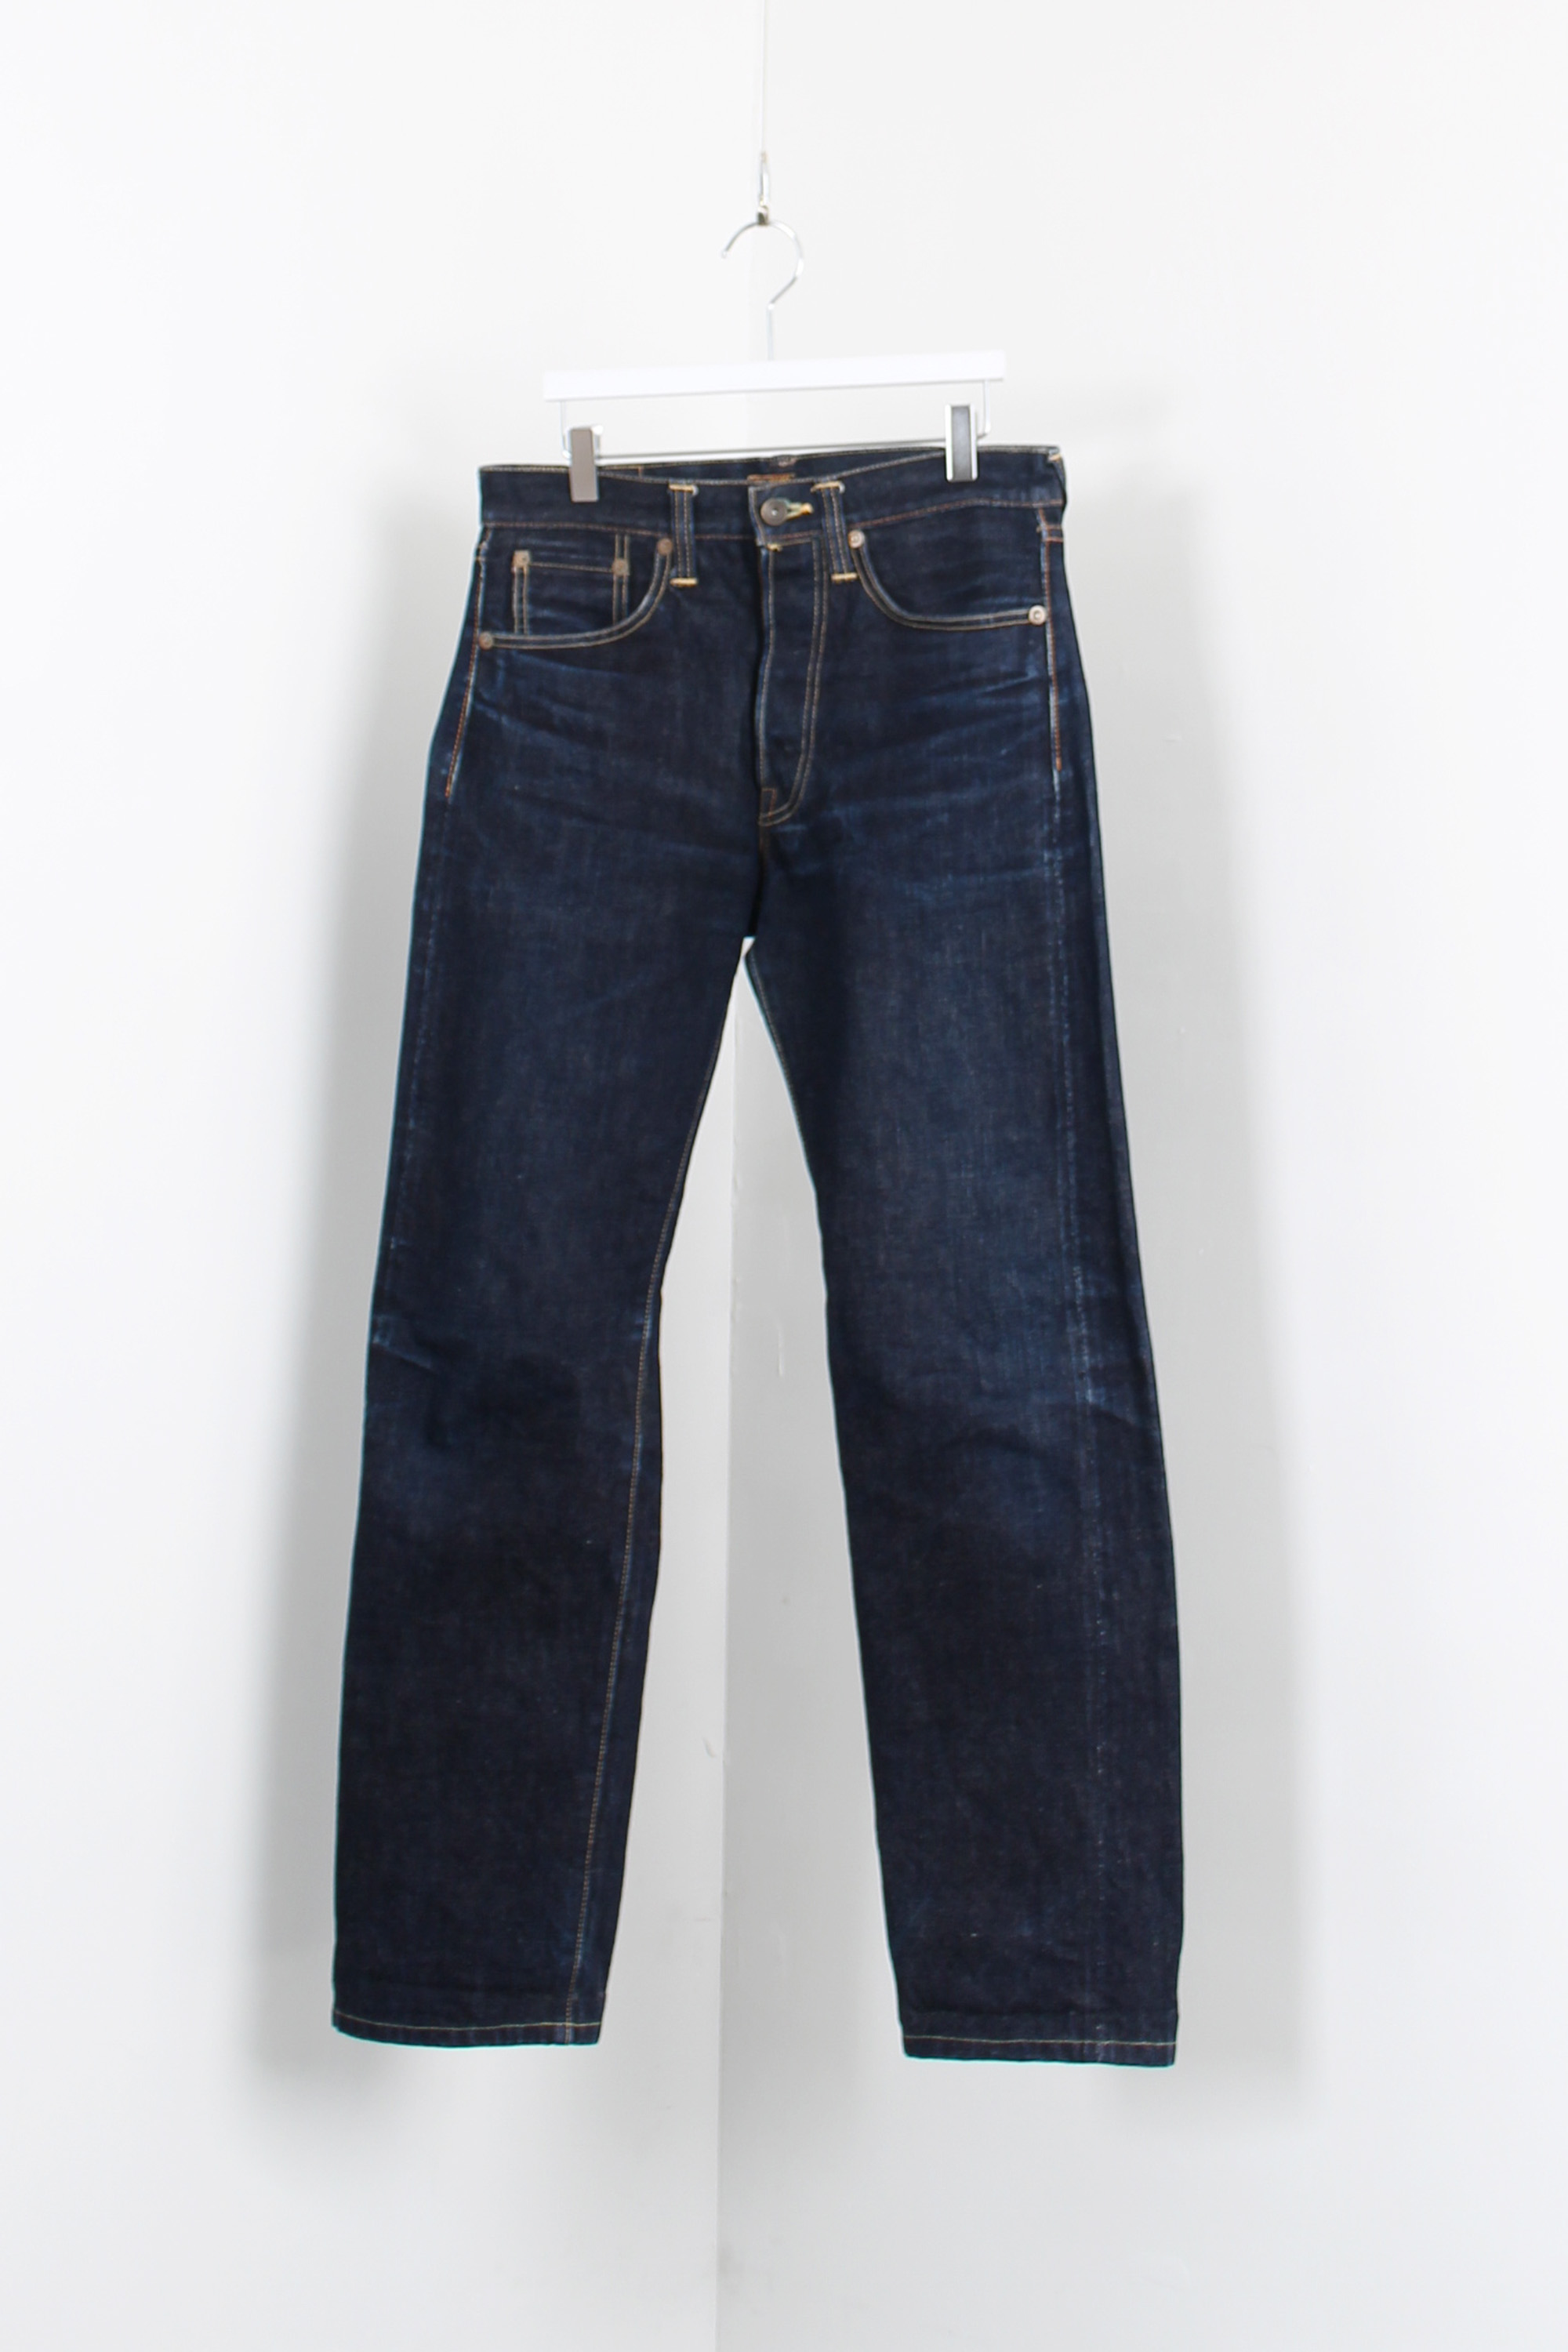 REAL McCOY selvage jean